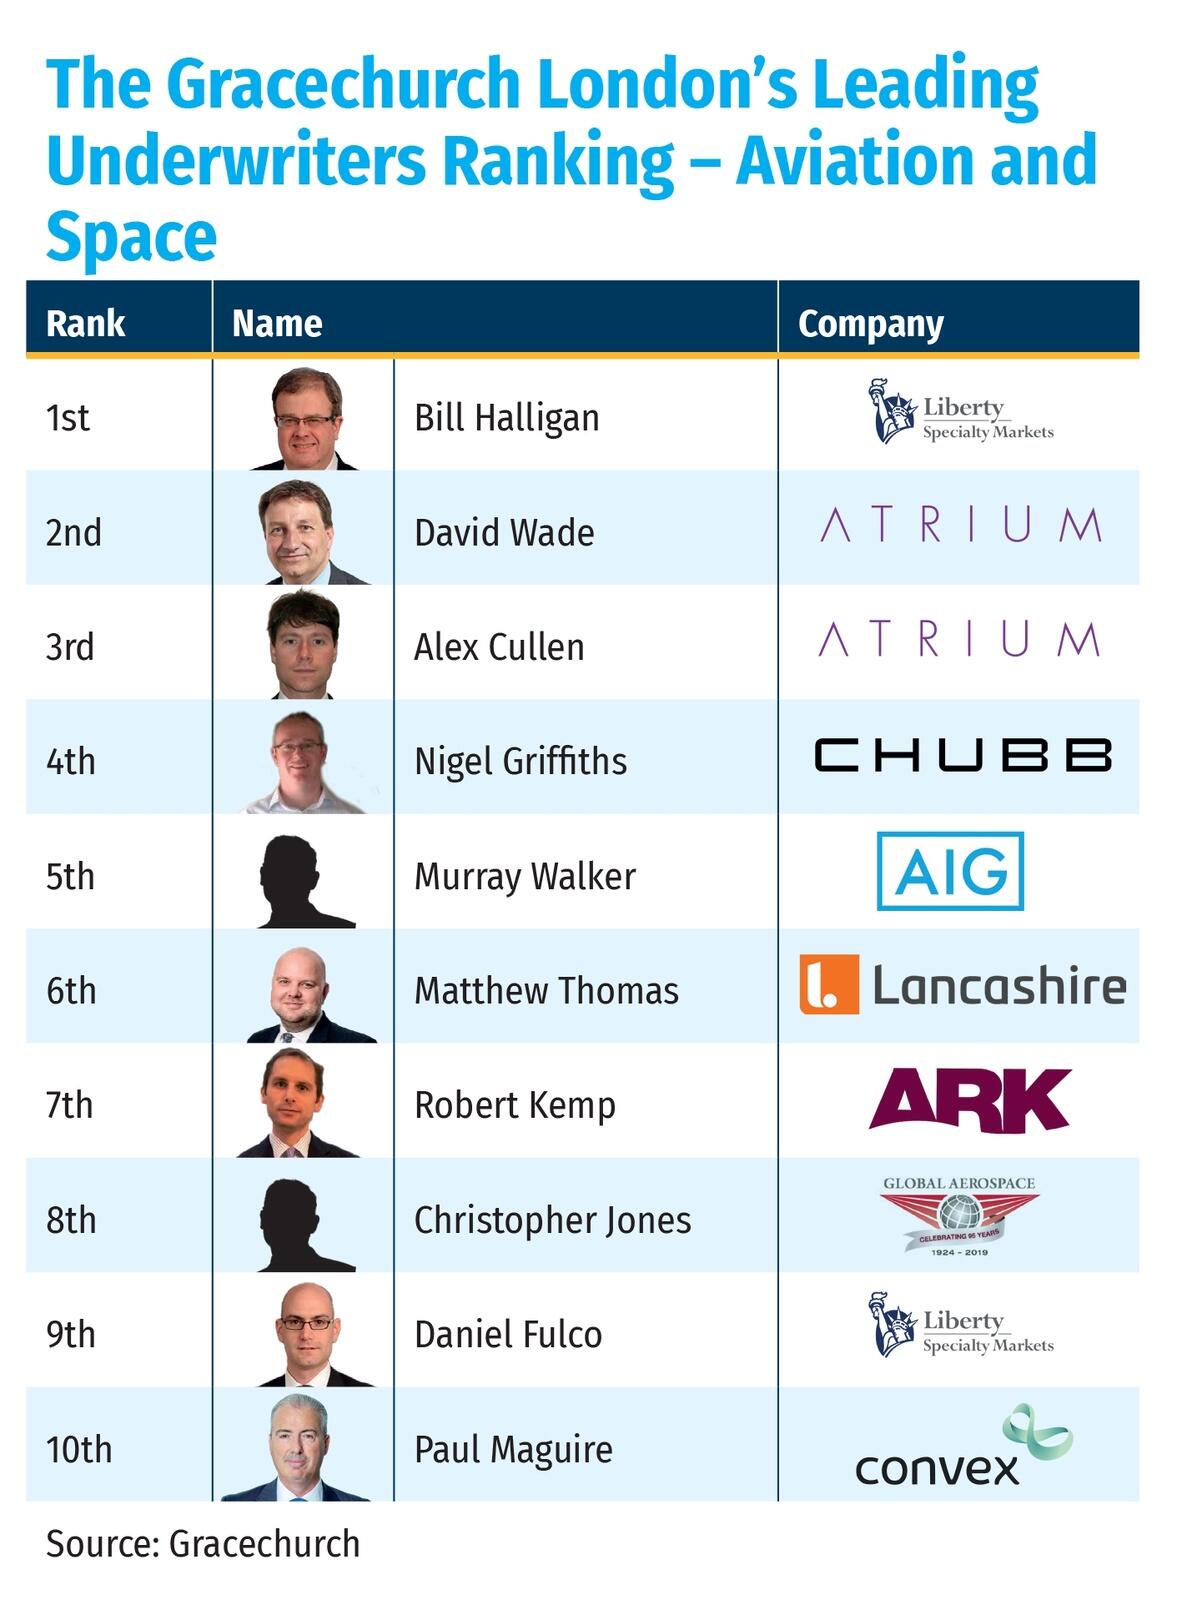 The Gracechurch London’s Leading Underwriters Ranking – Aviation and Space